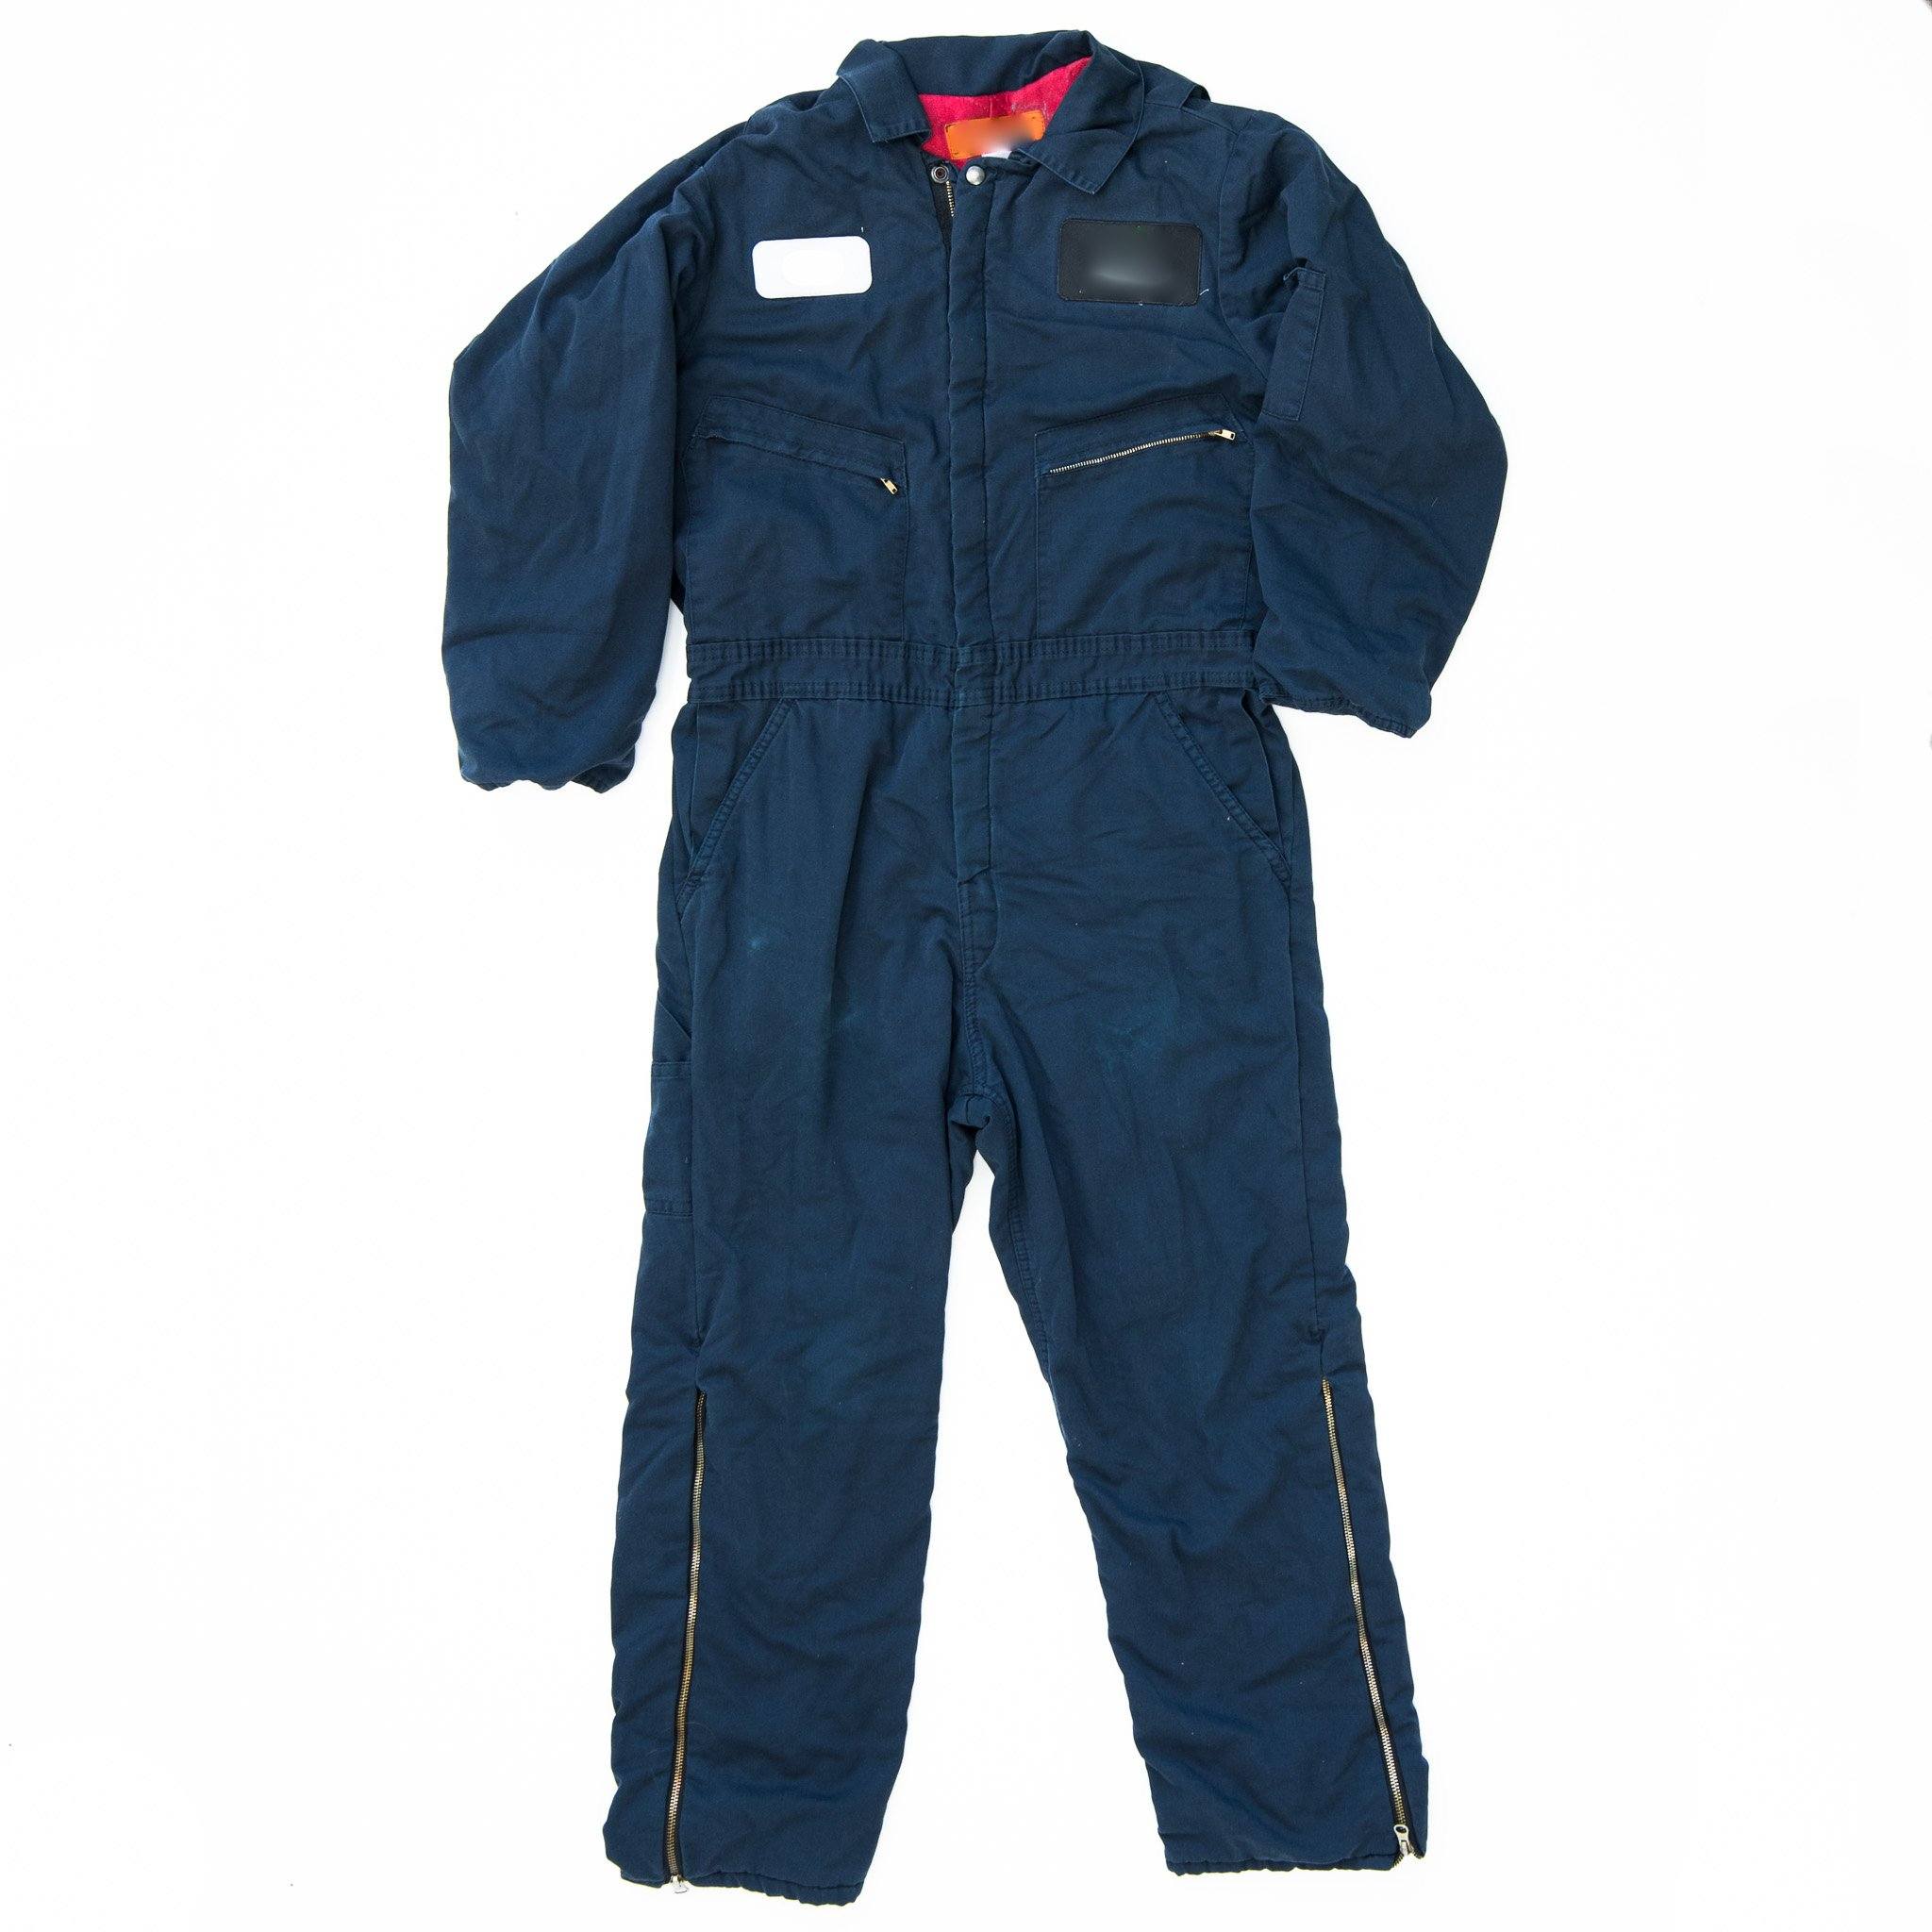 Used Insulated Work Coveralls | Walt's – Walt's Used Workwear